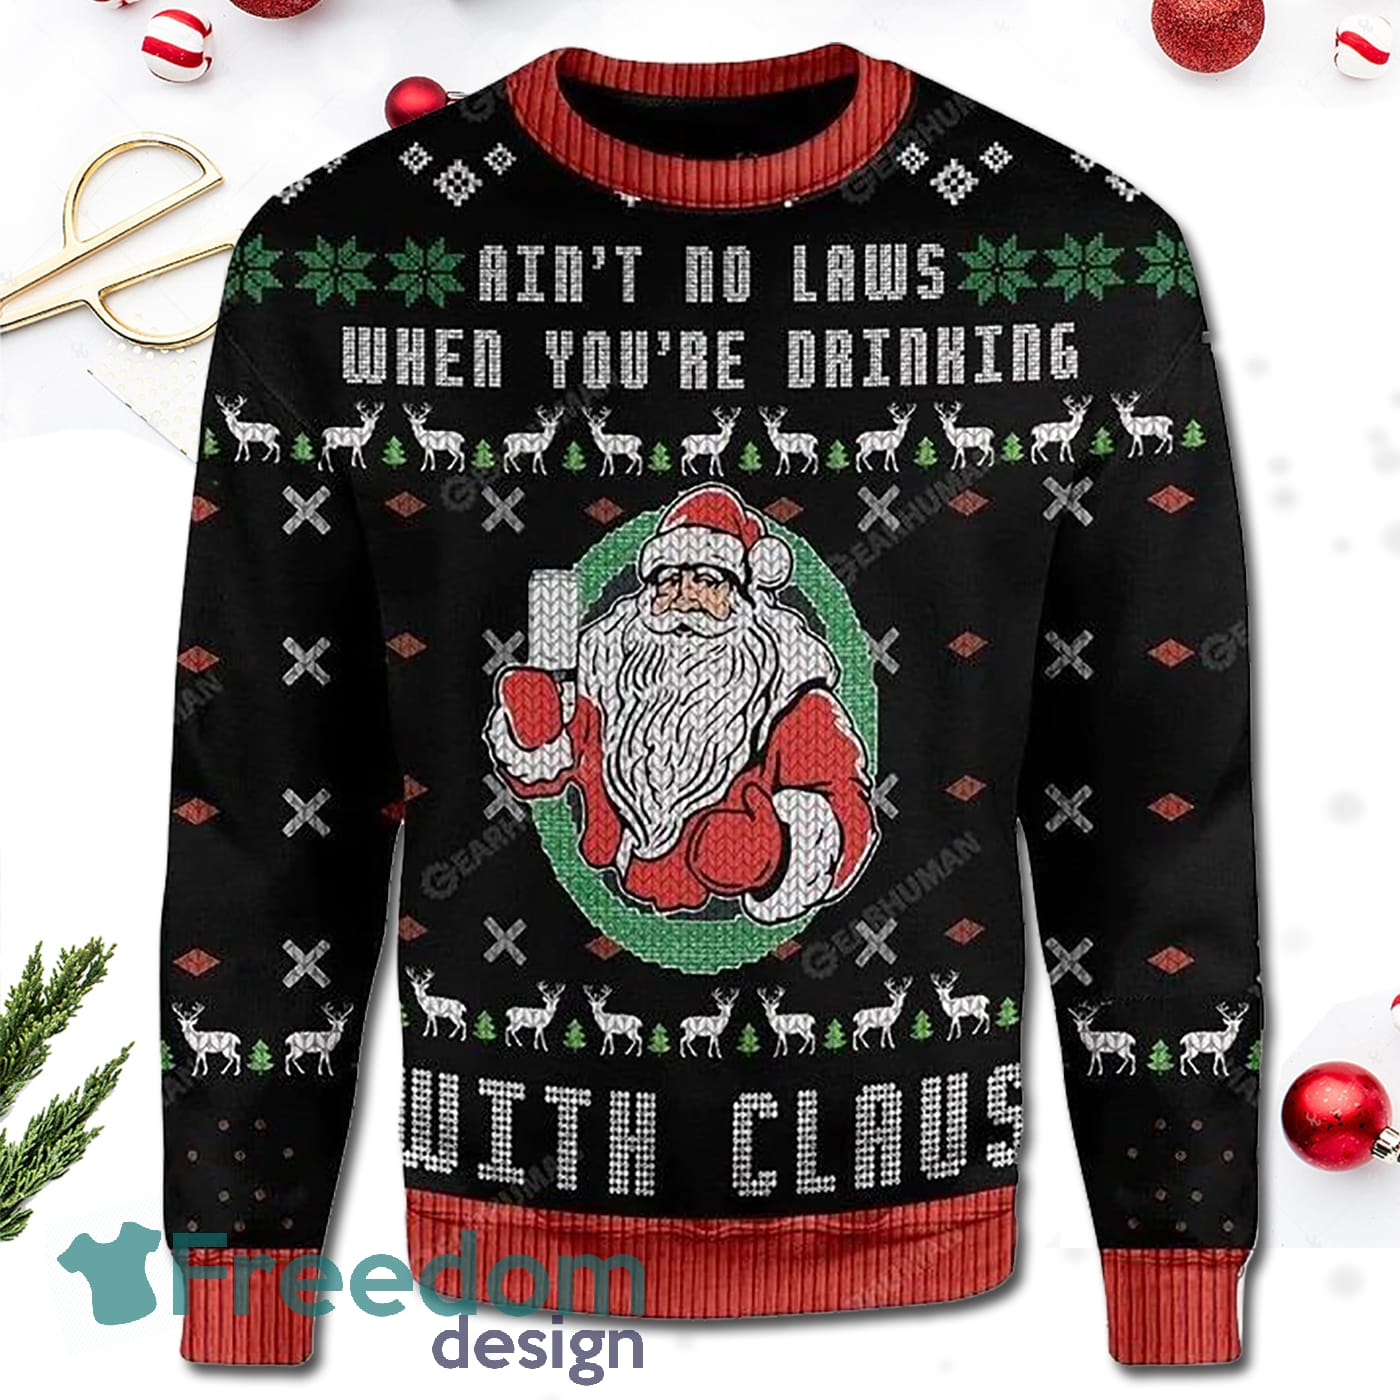 Ain't No Law When Drinking With Claws All Over Print 3D Christmas Sweater